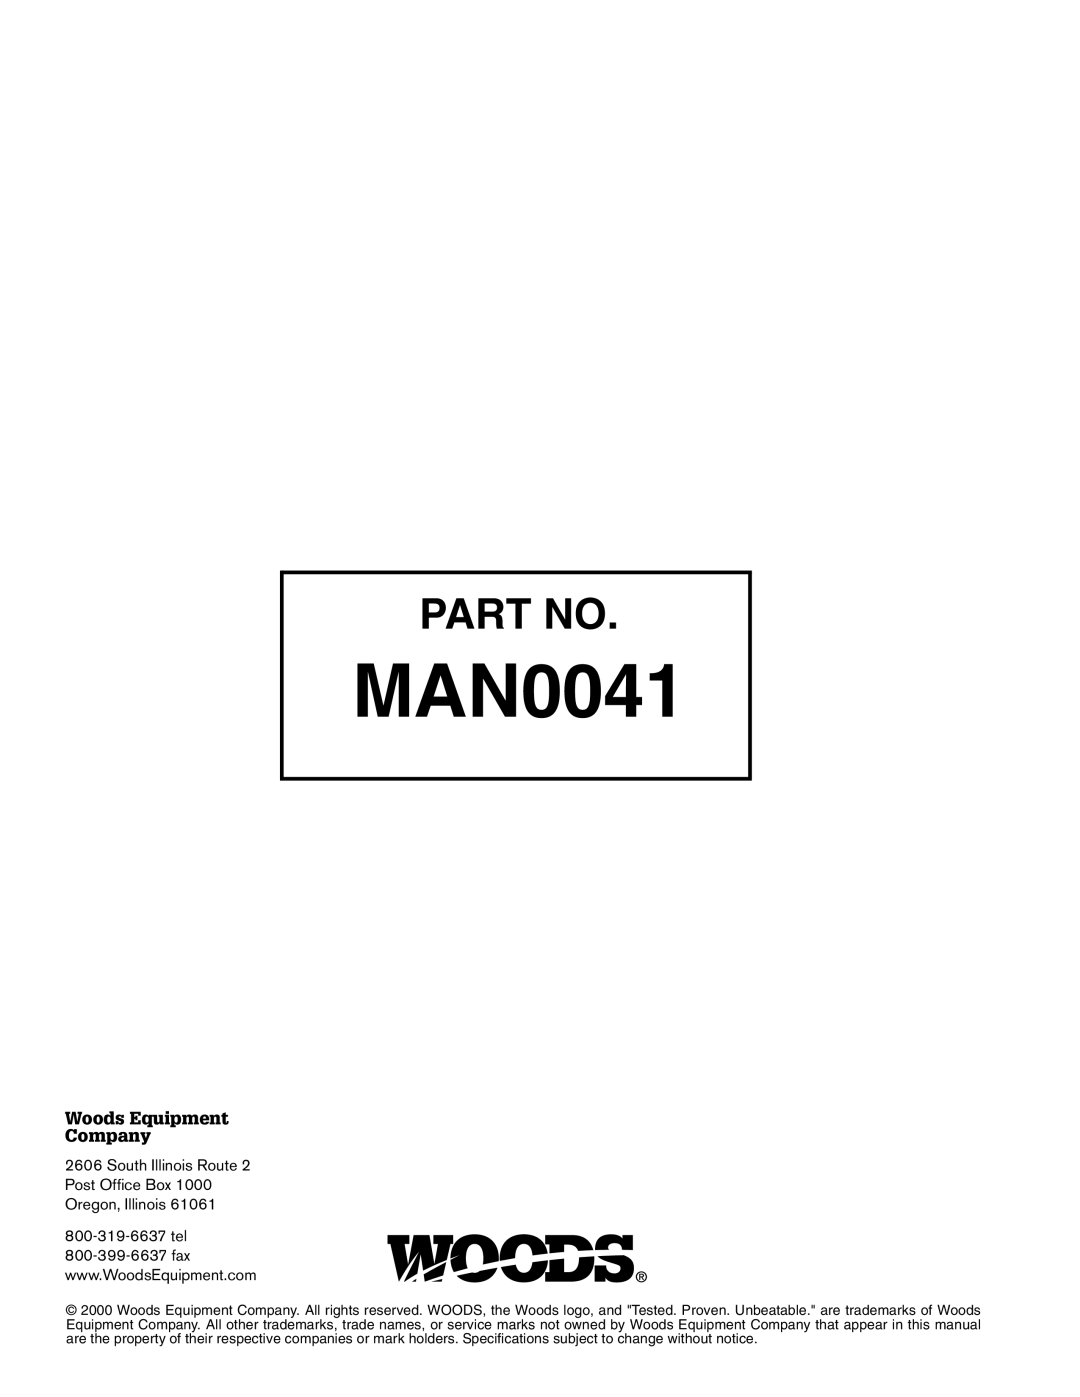 Woods Equipment LU126 installation manual MAN0041, Woods Equipment Company, South Illinois Route Post Office Box 